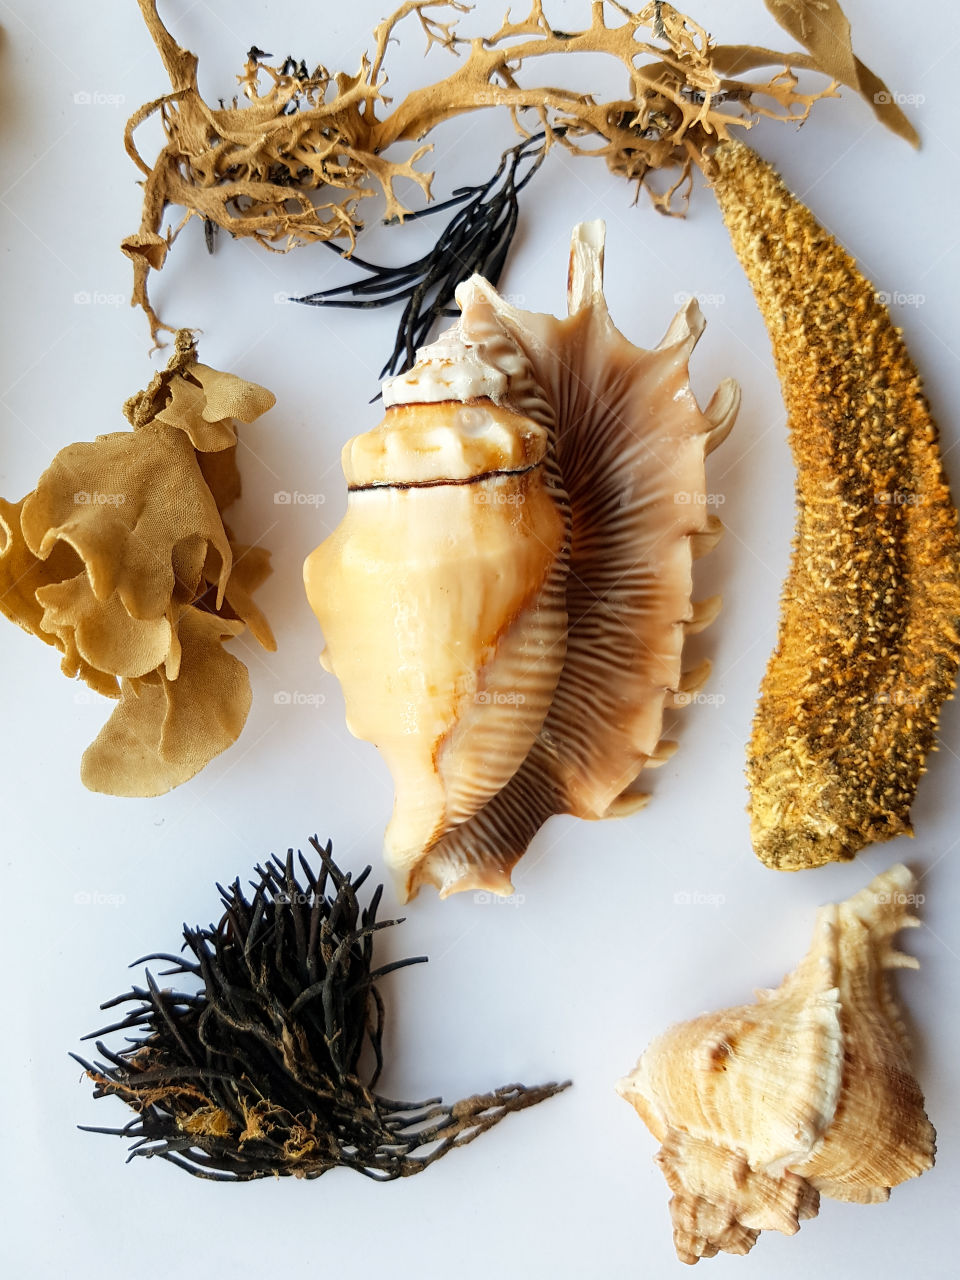 Beautiful shell's and seaweed on a white background.